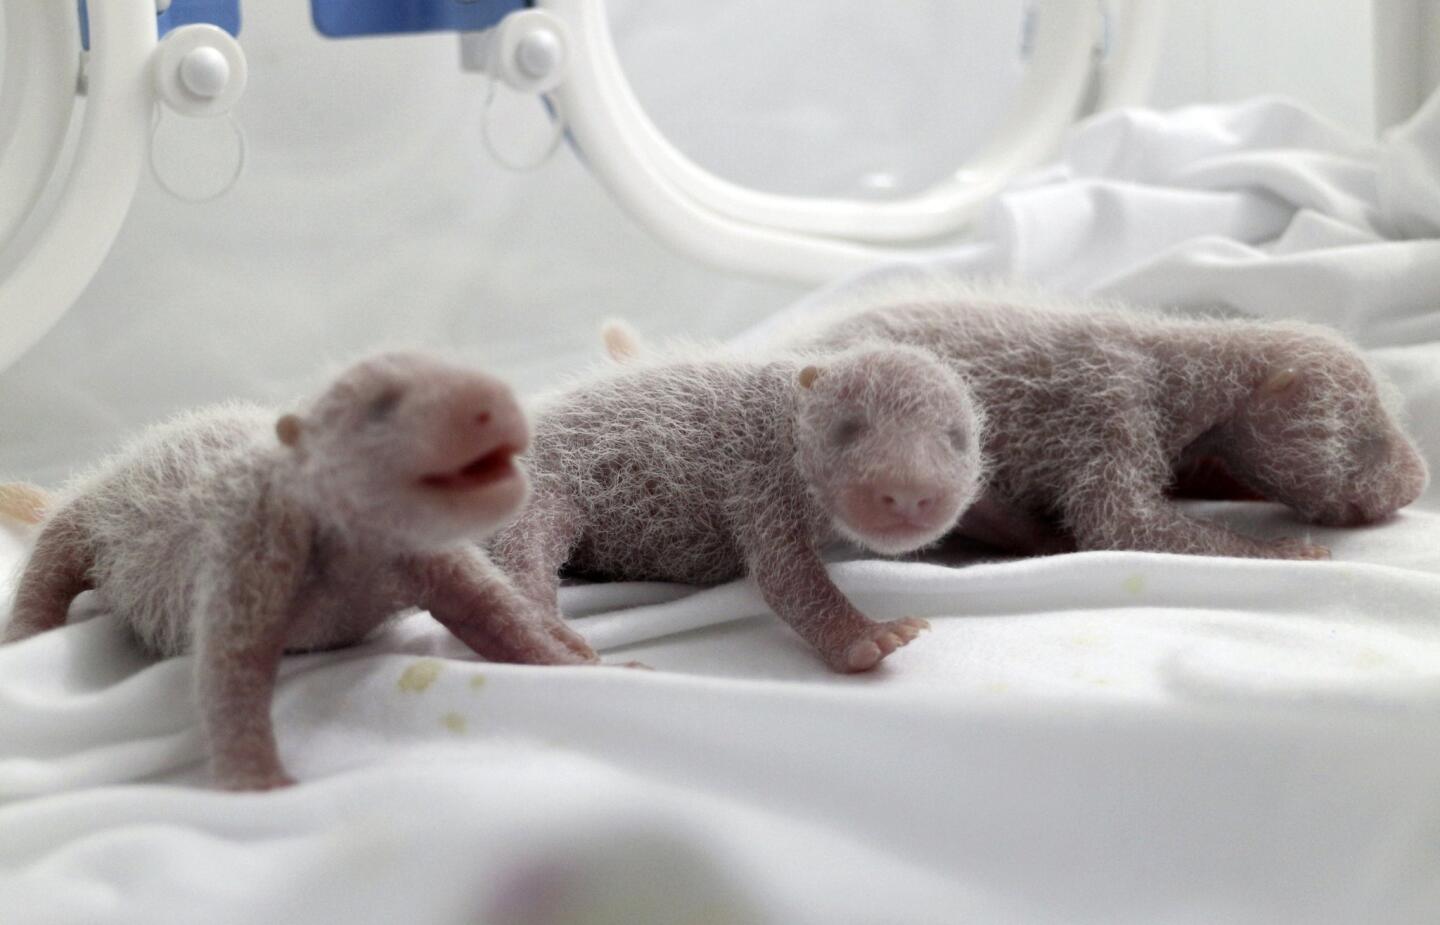 Newborn giant panda triplets, which were born to giant panda Juxiao (not pictured), are seen inside an incubator at the Chimelong Safari Park in Guangzhou, Guangdong province August 4, 2014.